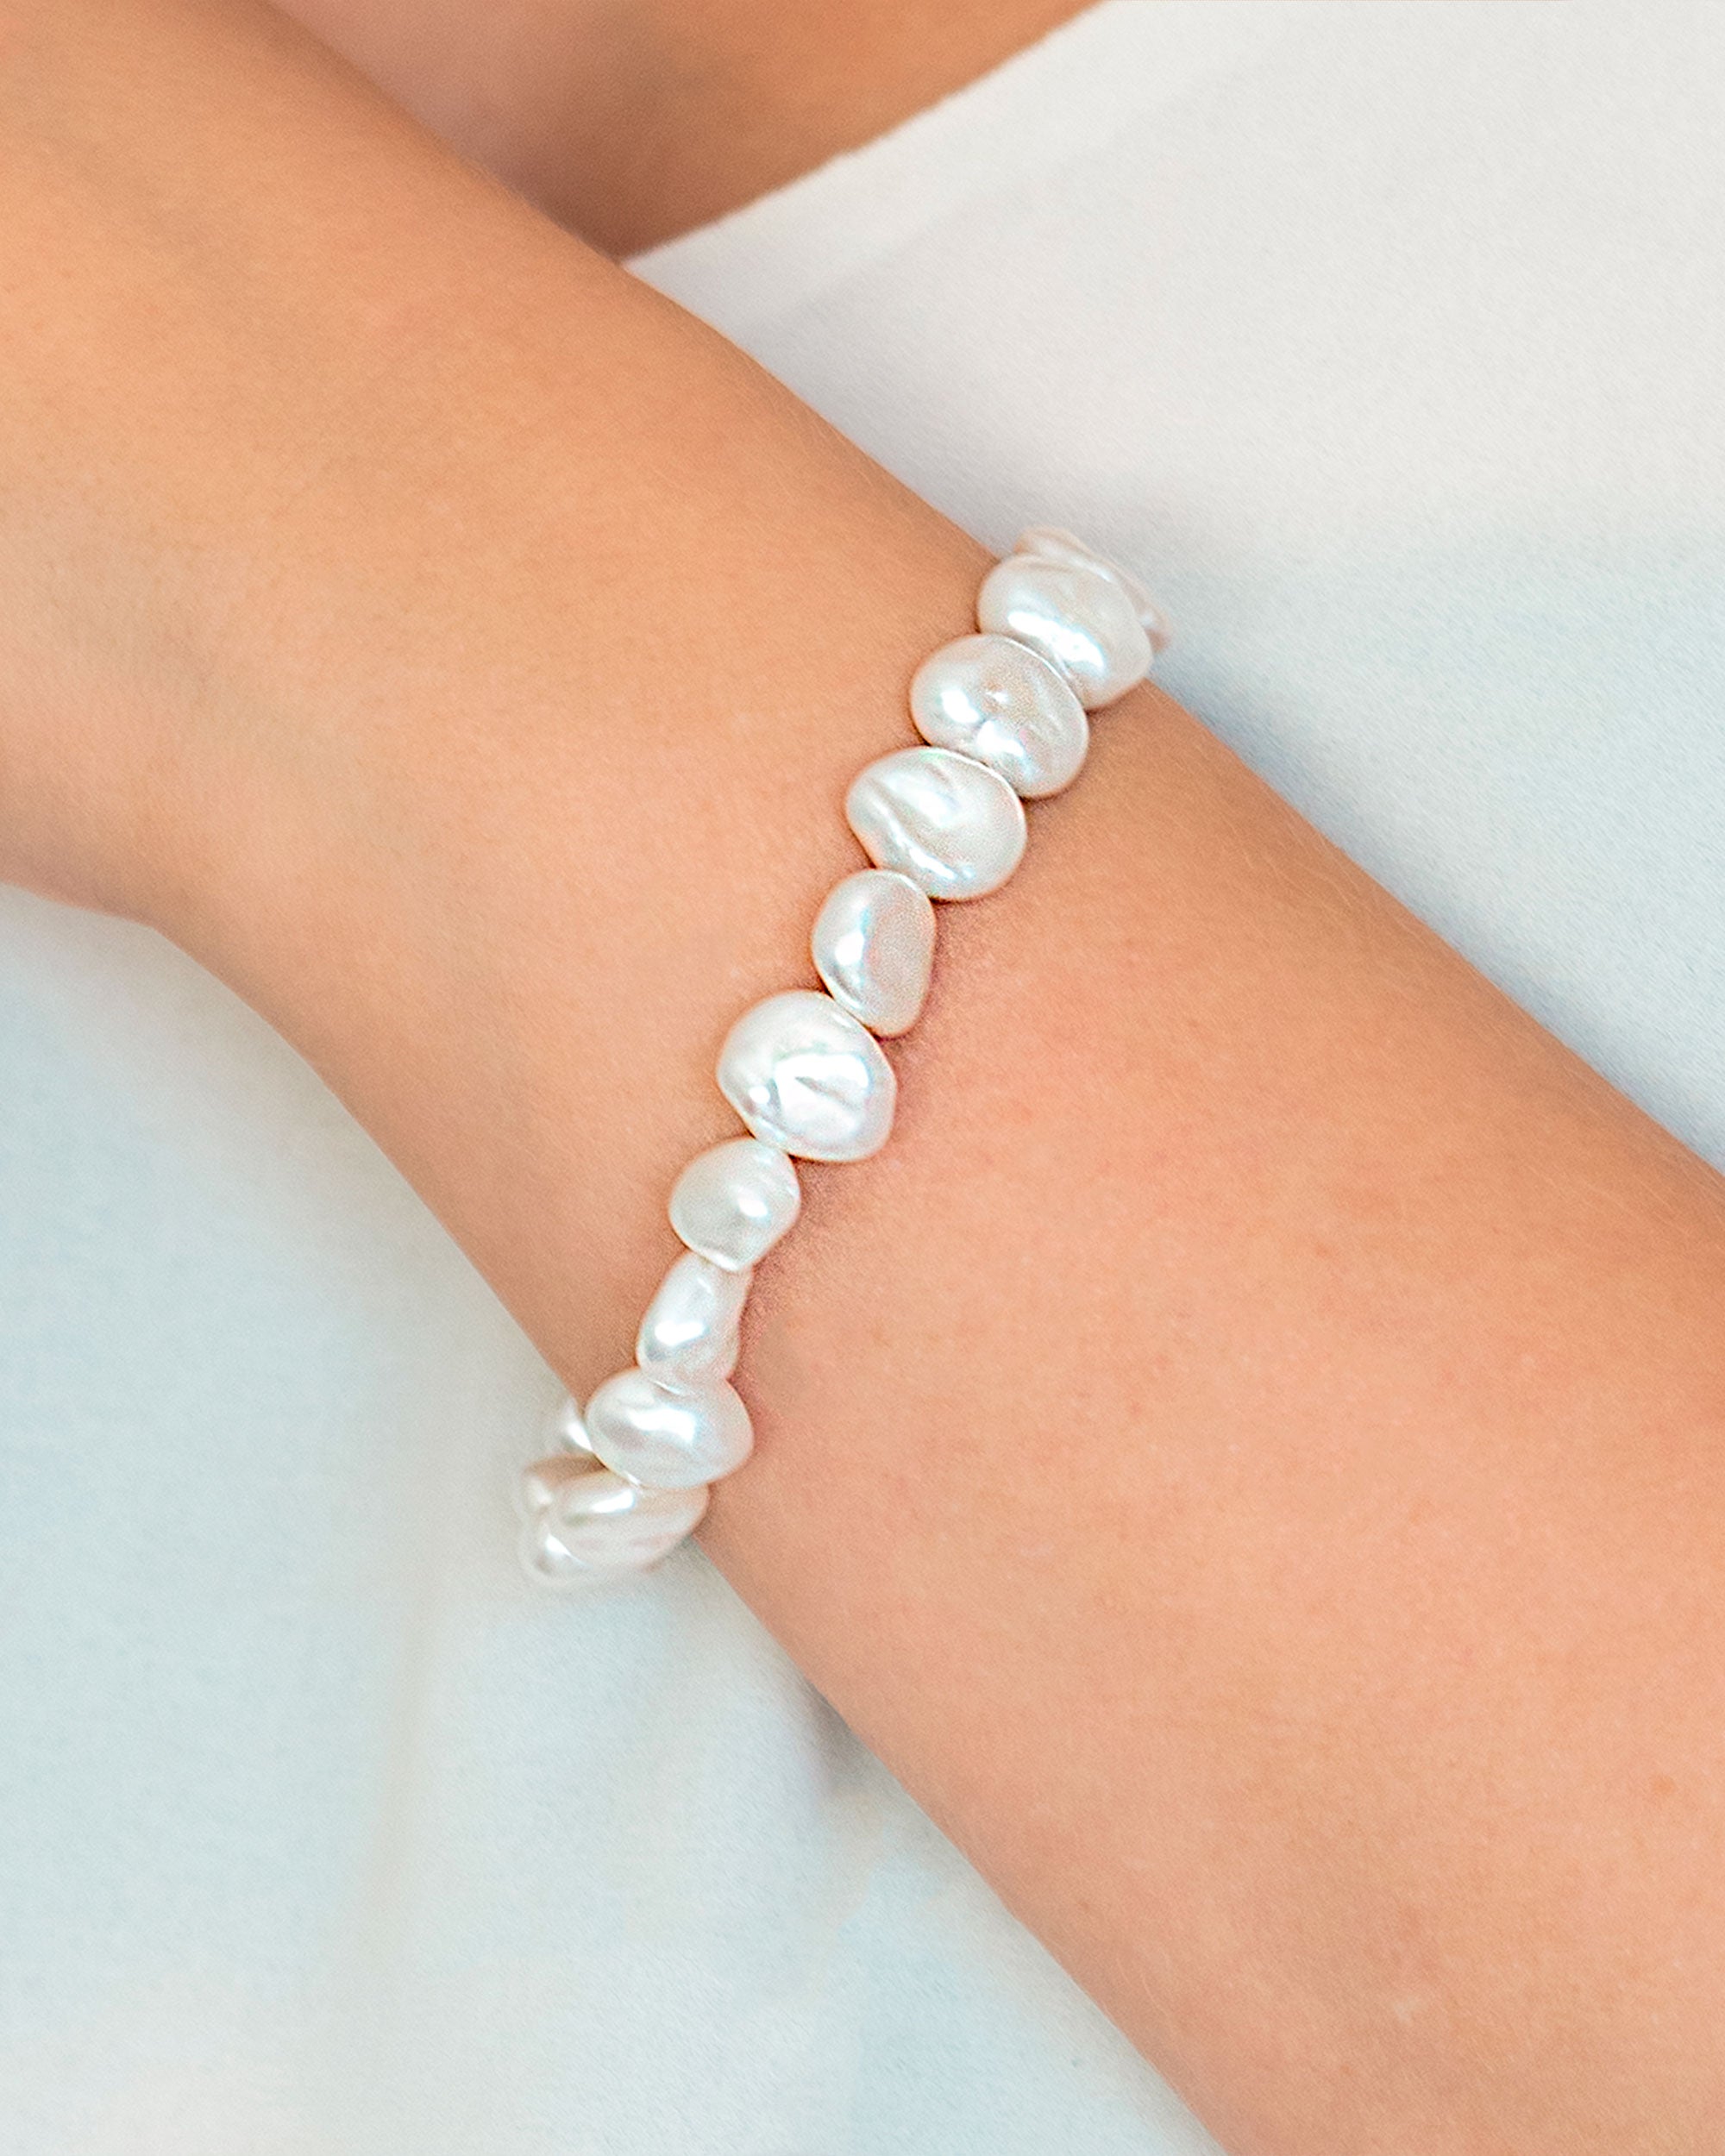 Elastic Charming Natural Real Cultured Freshwater Baroque Pearl Bracelet  Jewelry  China Pearl Bracelet and Baroque Pearl Bracelet price   MadeinChinacom